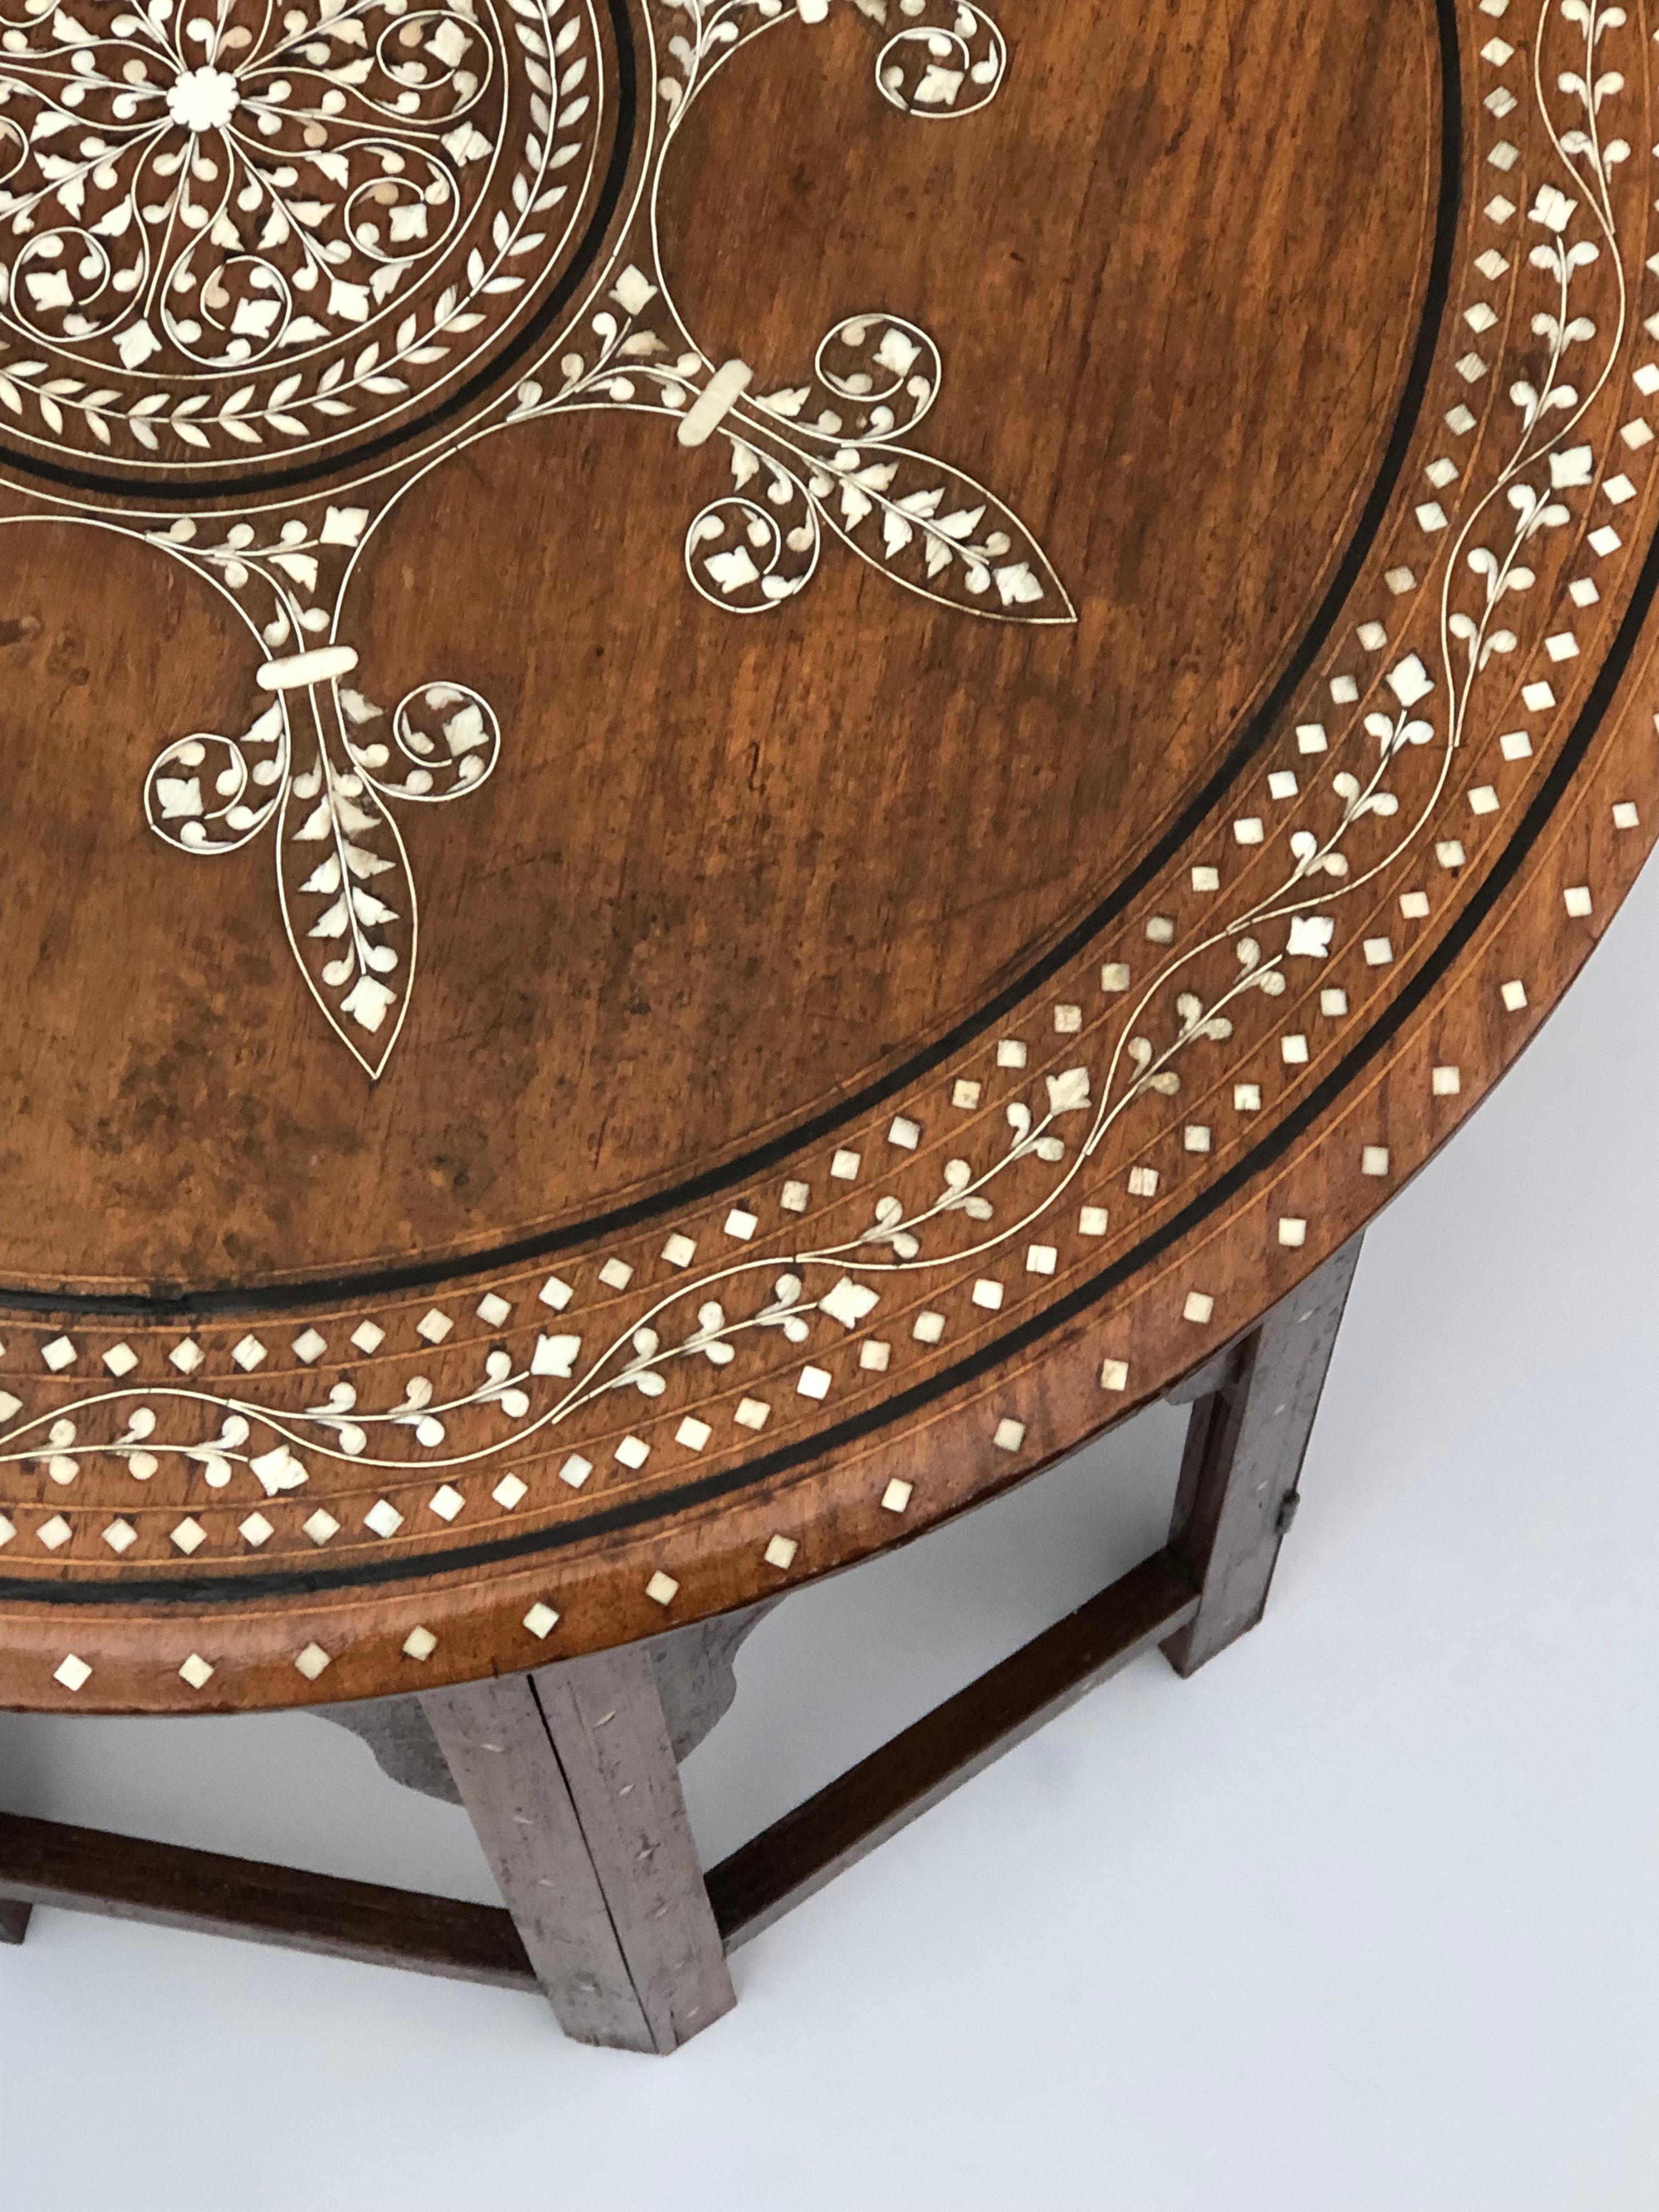 The round top centering a large inlaid medallion surrounded by a meandering inlaid foliate band; all raised on an octagonal hinged base with arabesque openings.